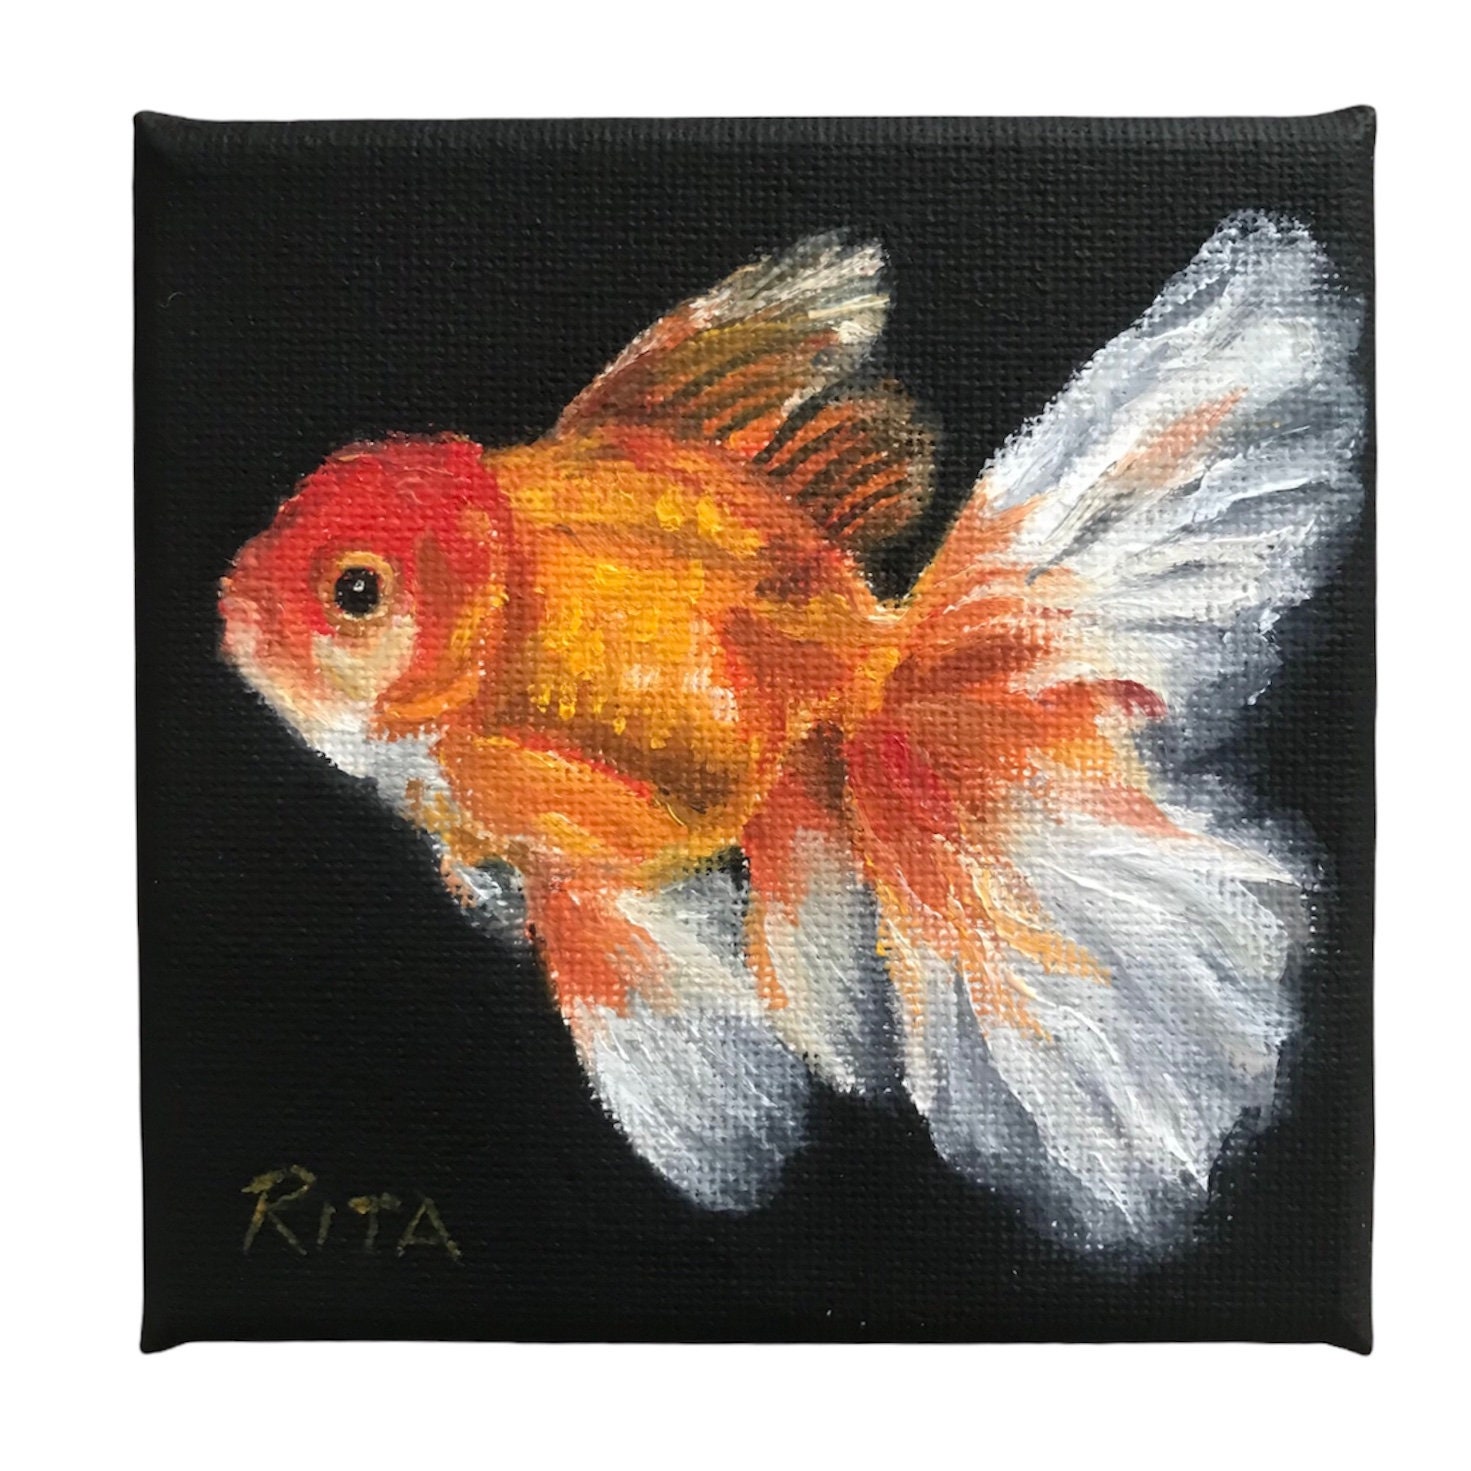 Portrait Painting on Canvas, Warrior Girl Sisters Goldfish 16x20